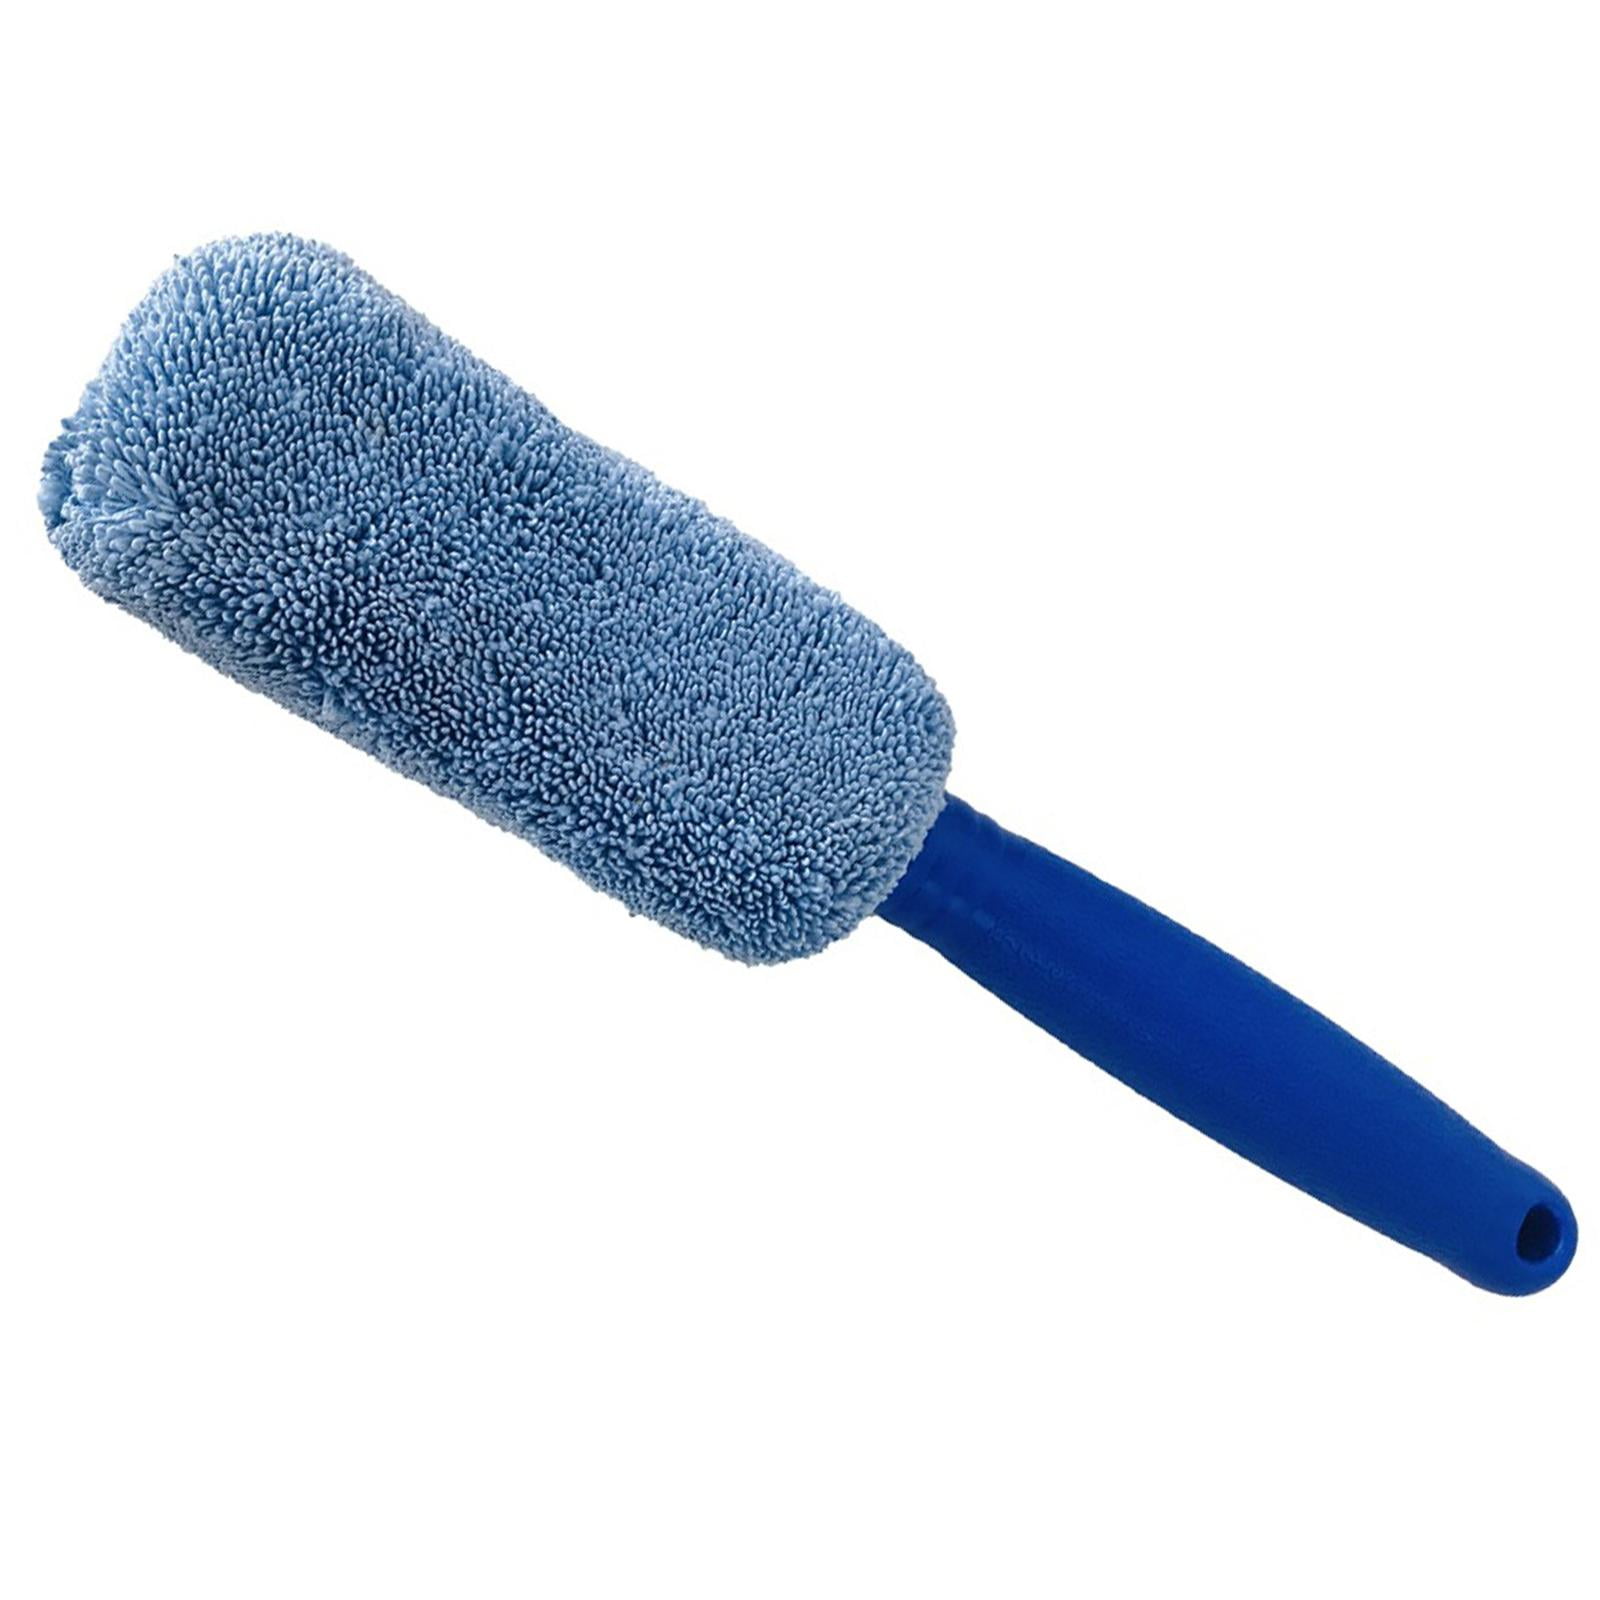 EVERSPROUT 11-inch Scrub Brush with Built-in Rubber Bumper